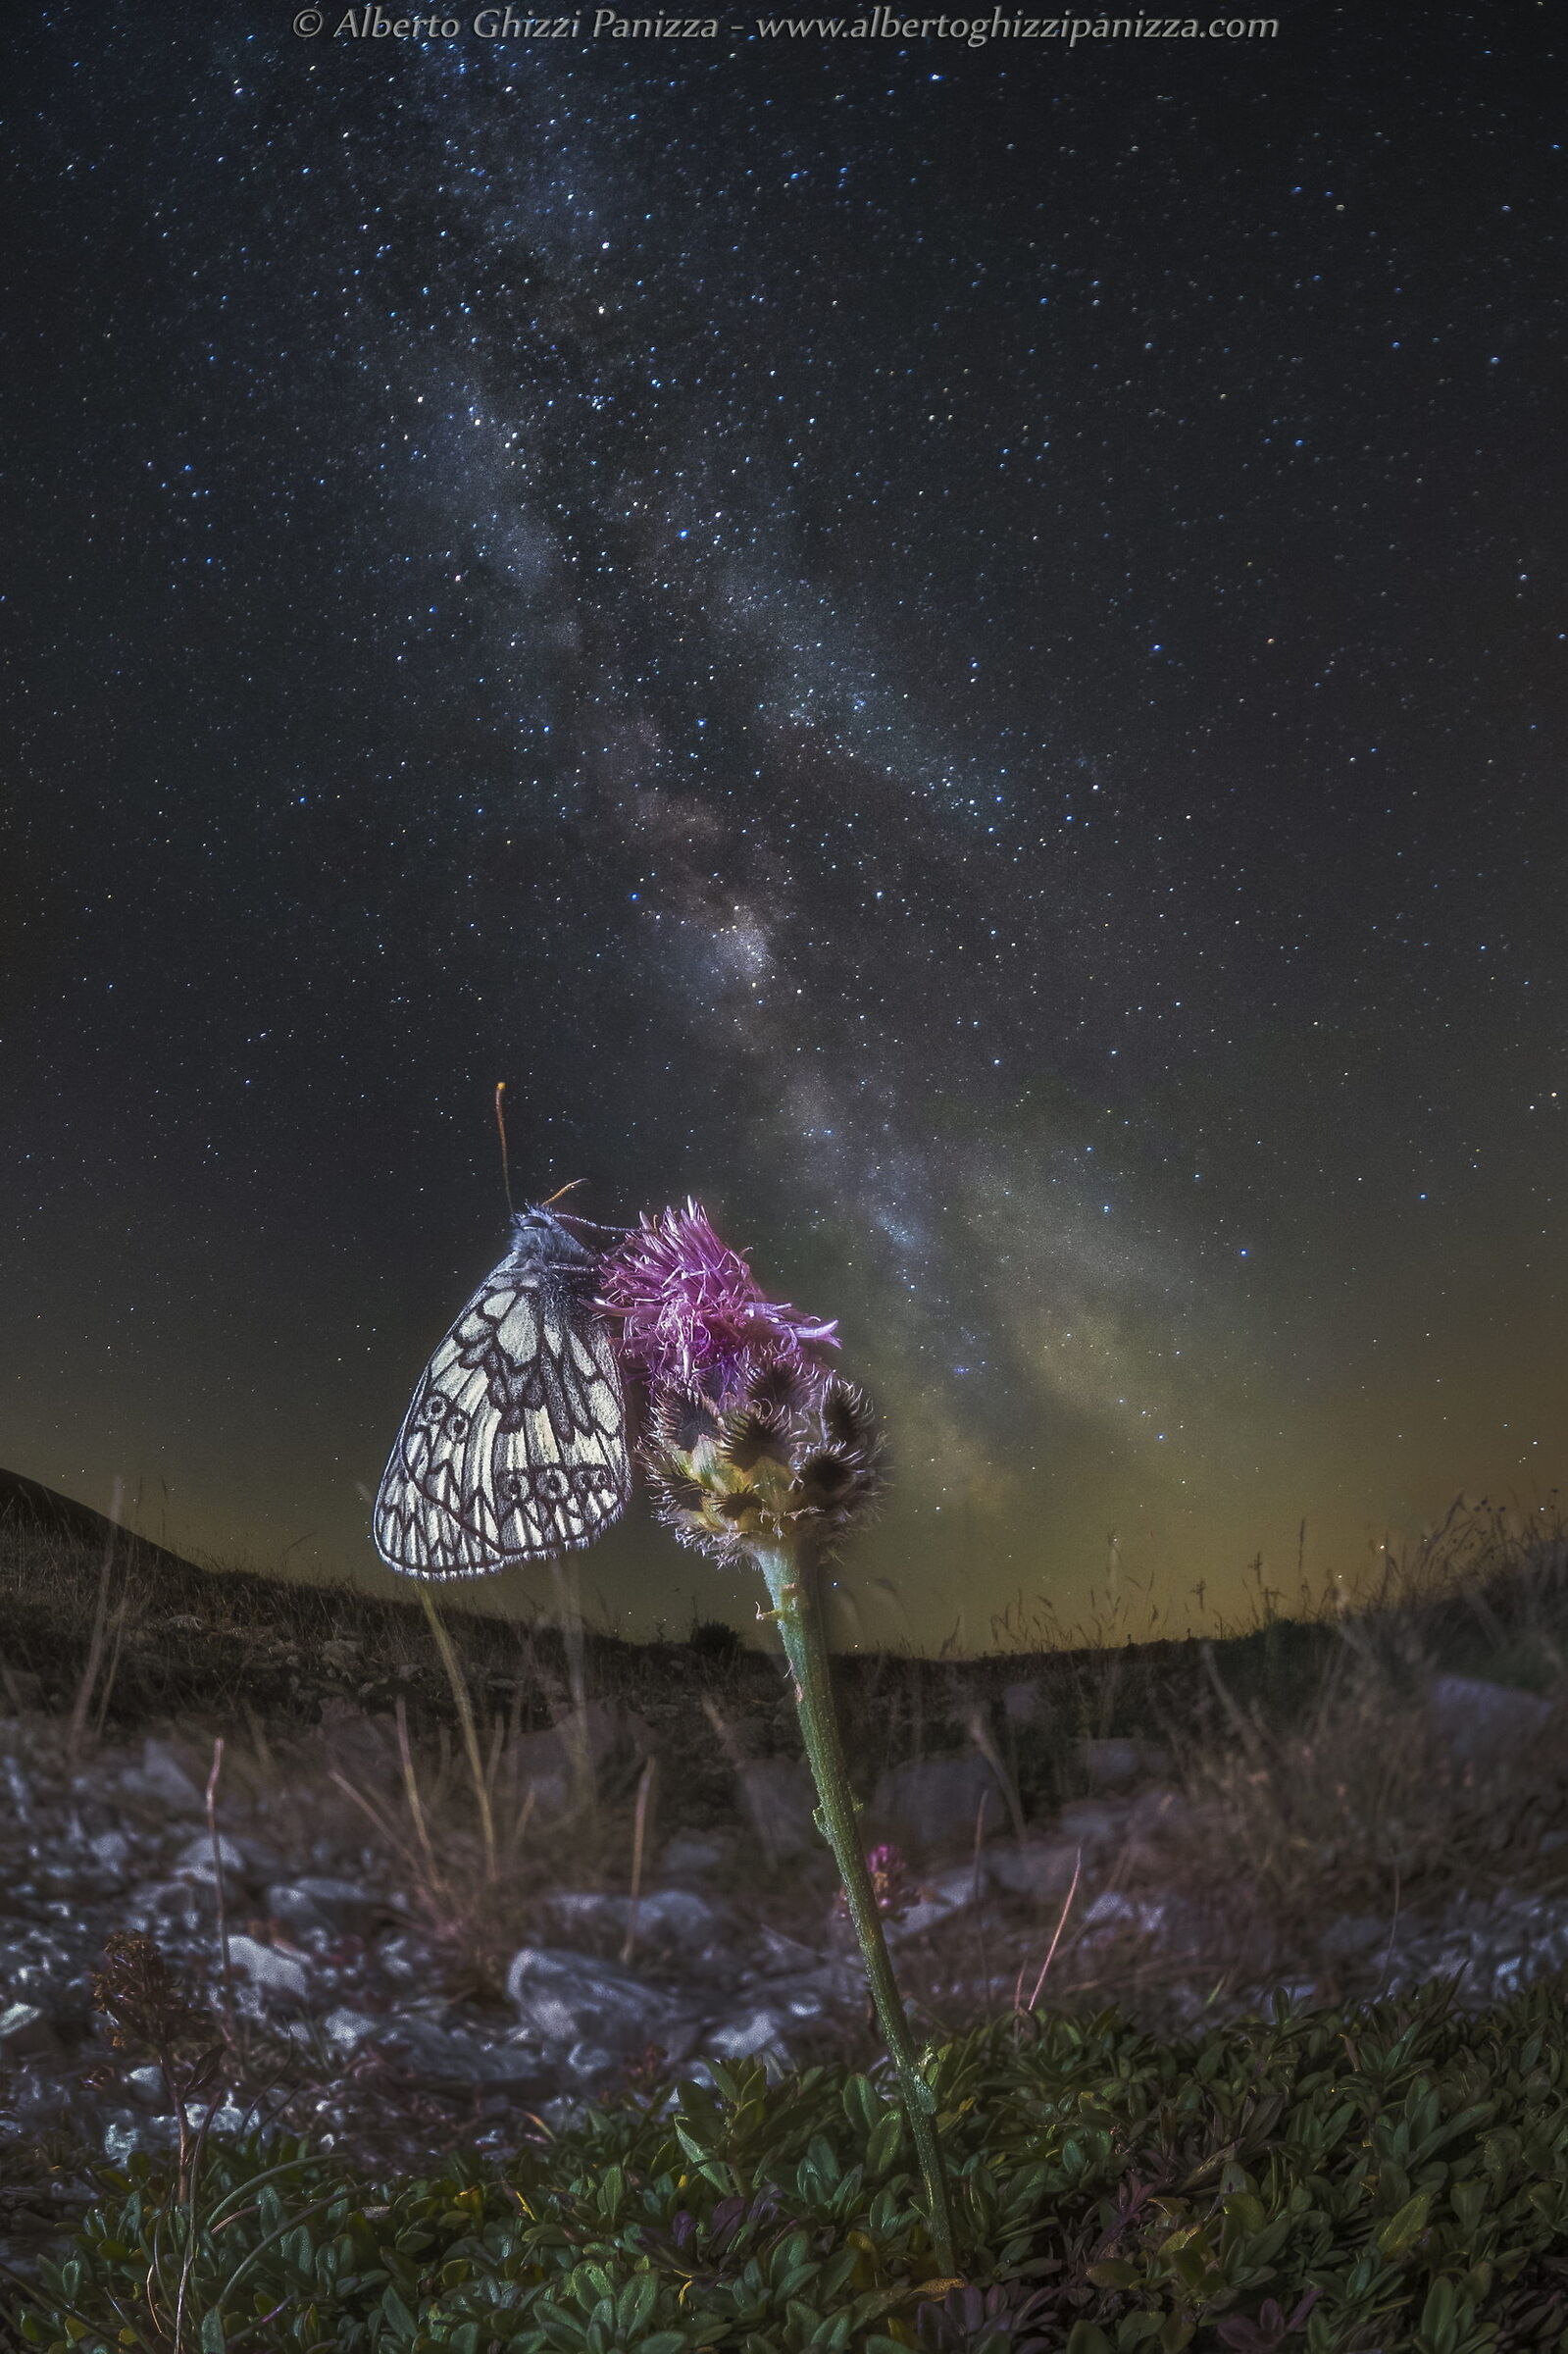 A butterfly rests in the light of the stars...